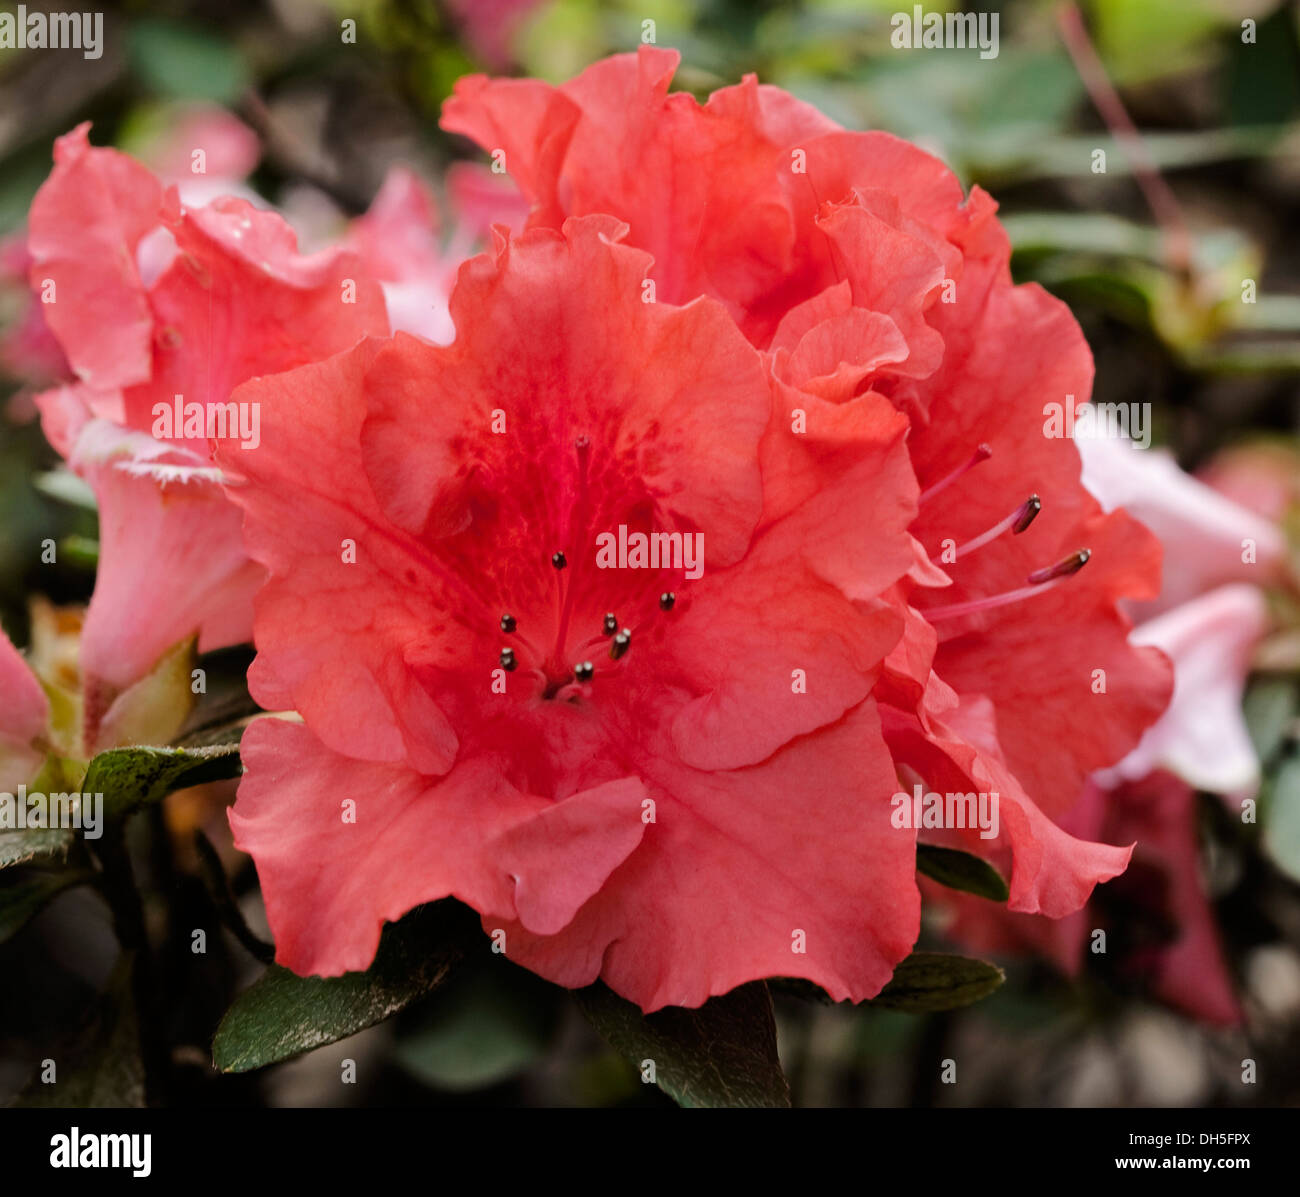 Apricot pink / orange flowers of Azalea indica 'Coral Wings' Stock Photo